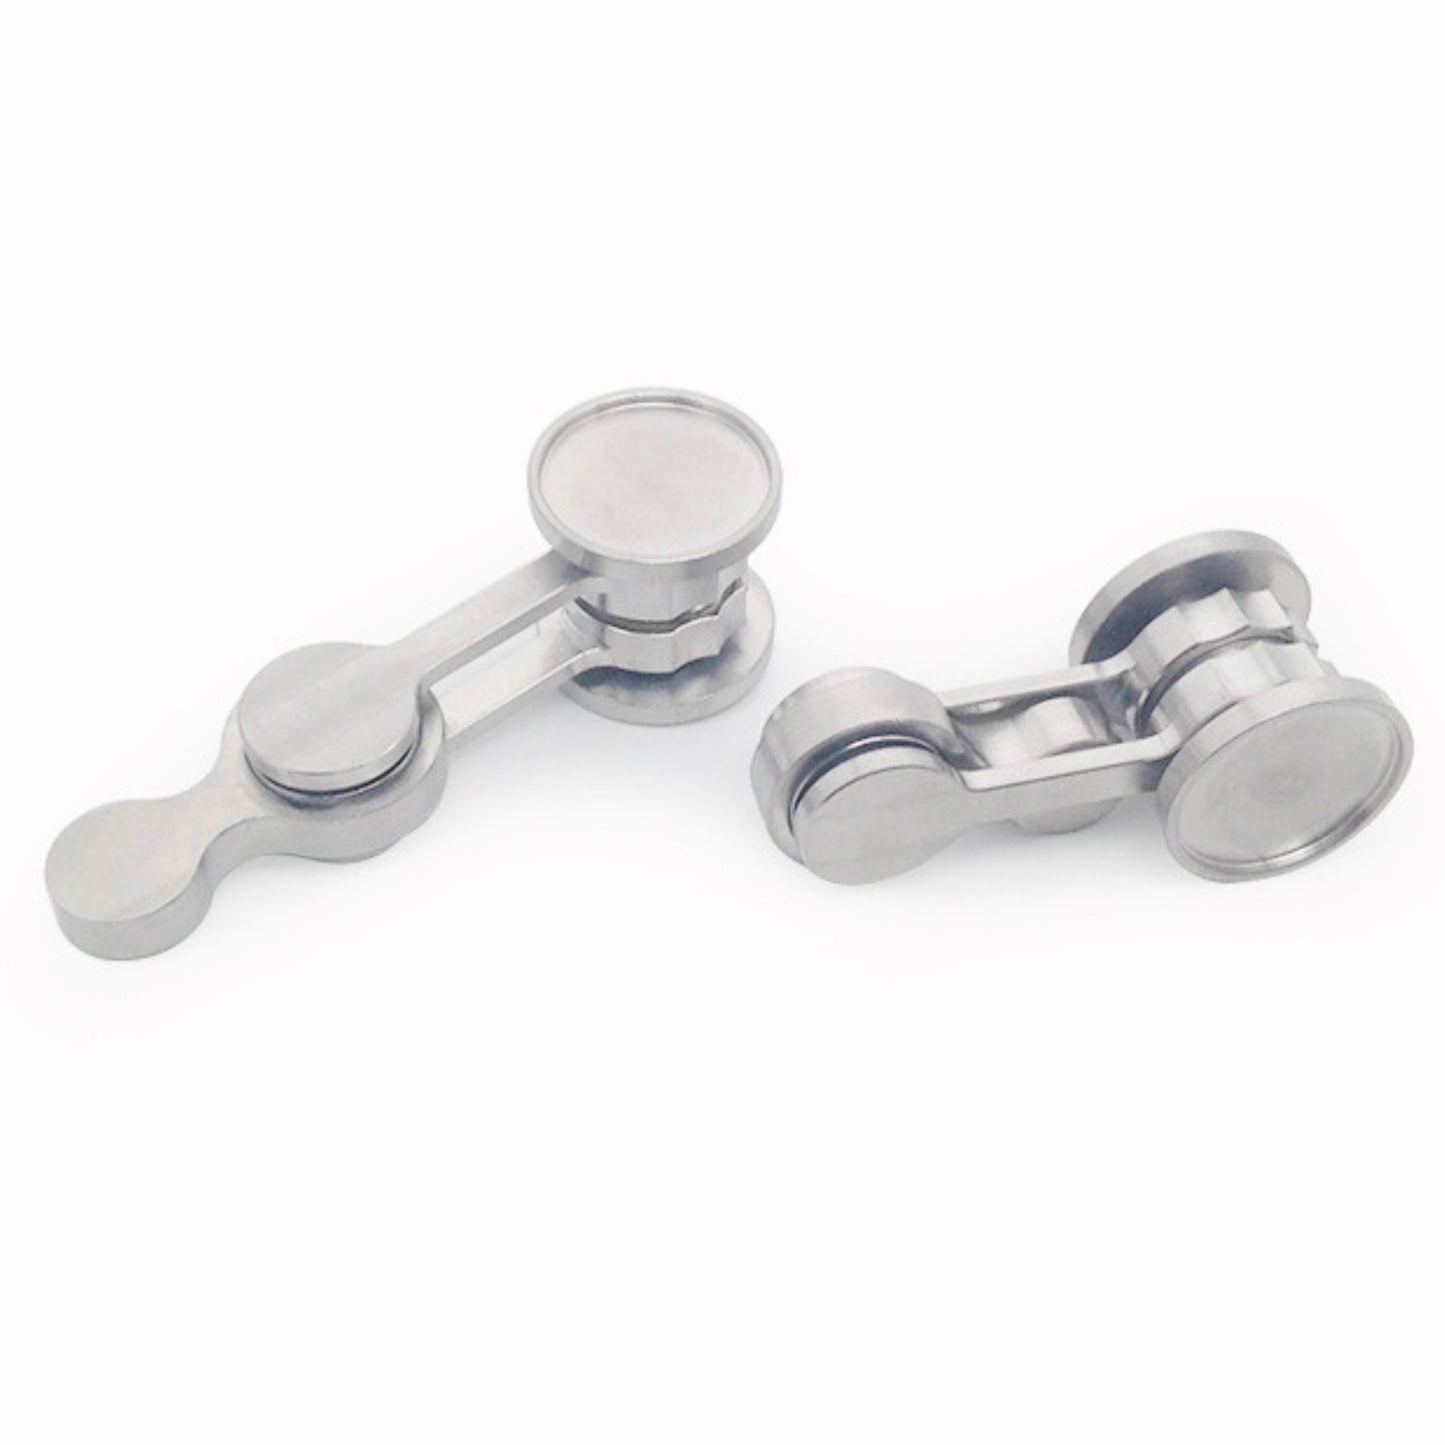 Stainless Steel Anti-Anxiety Stress Relief Fidget Spinner Hand Toy